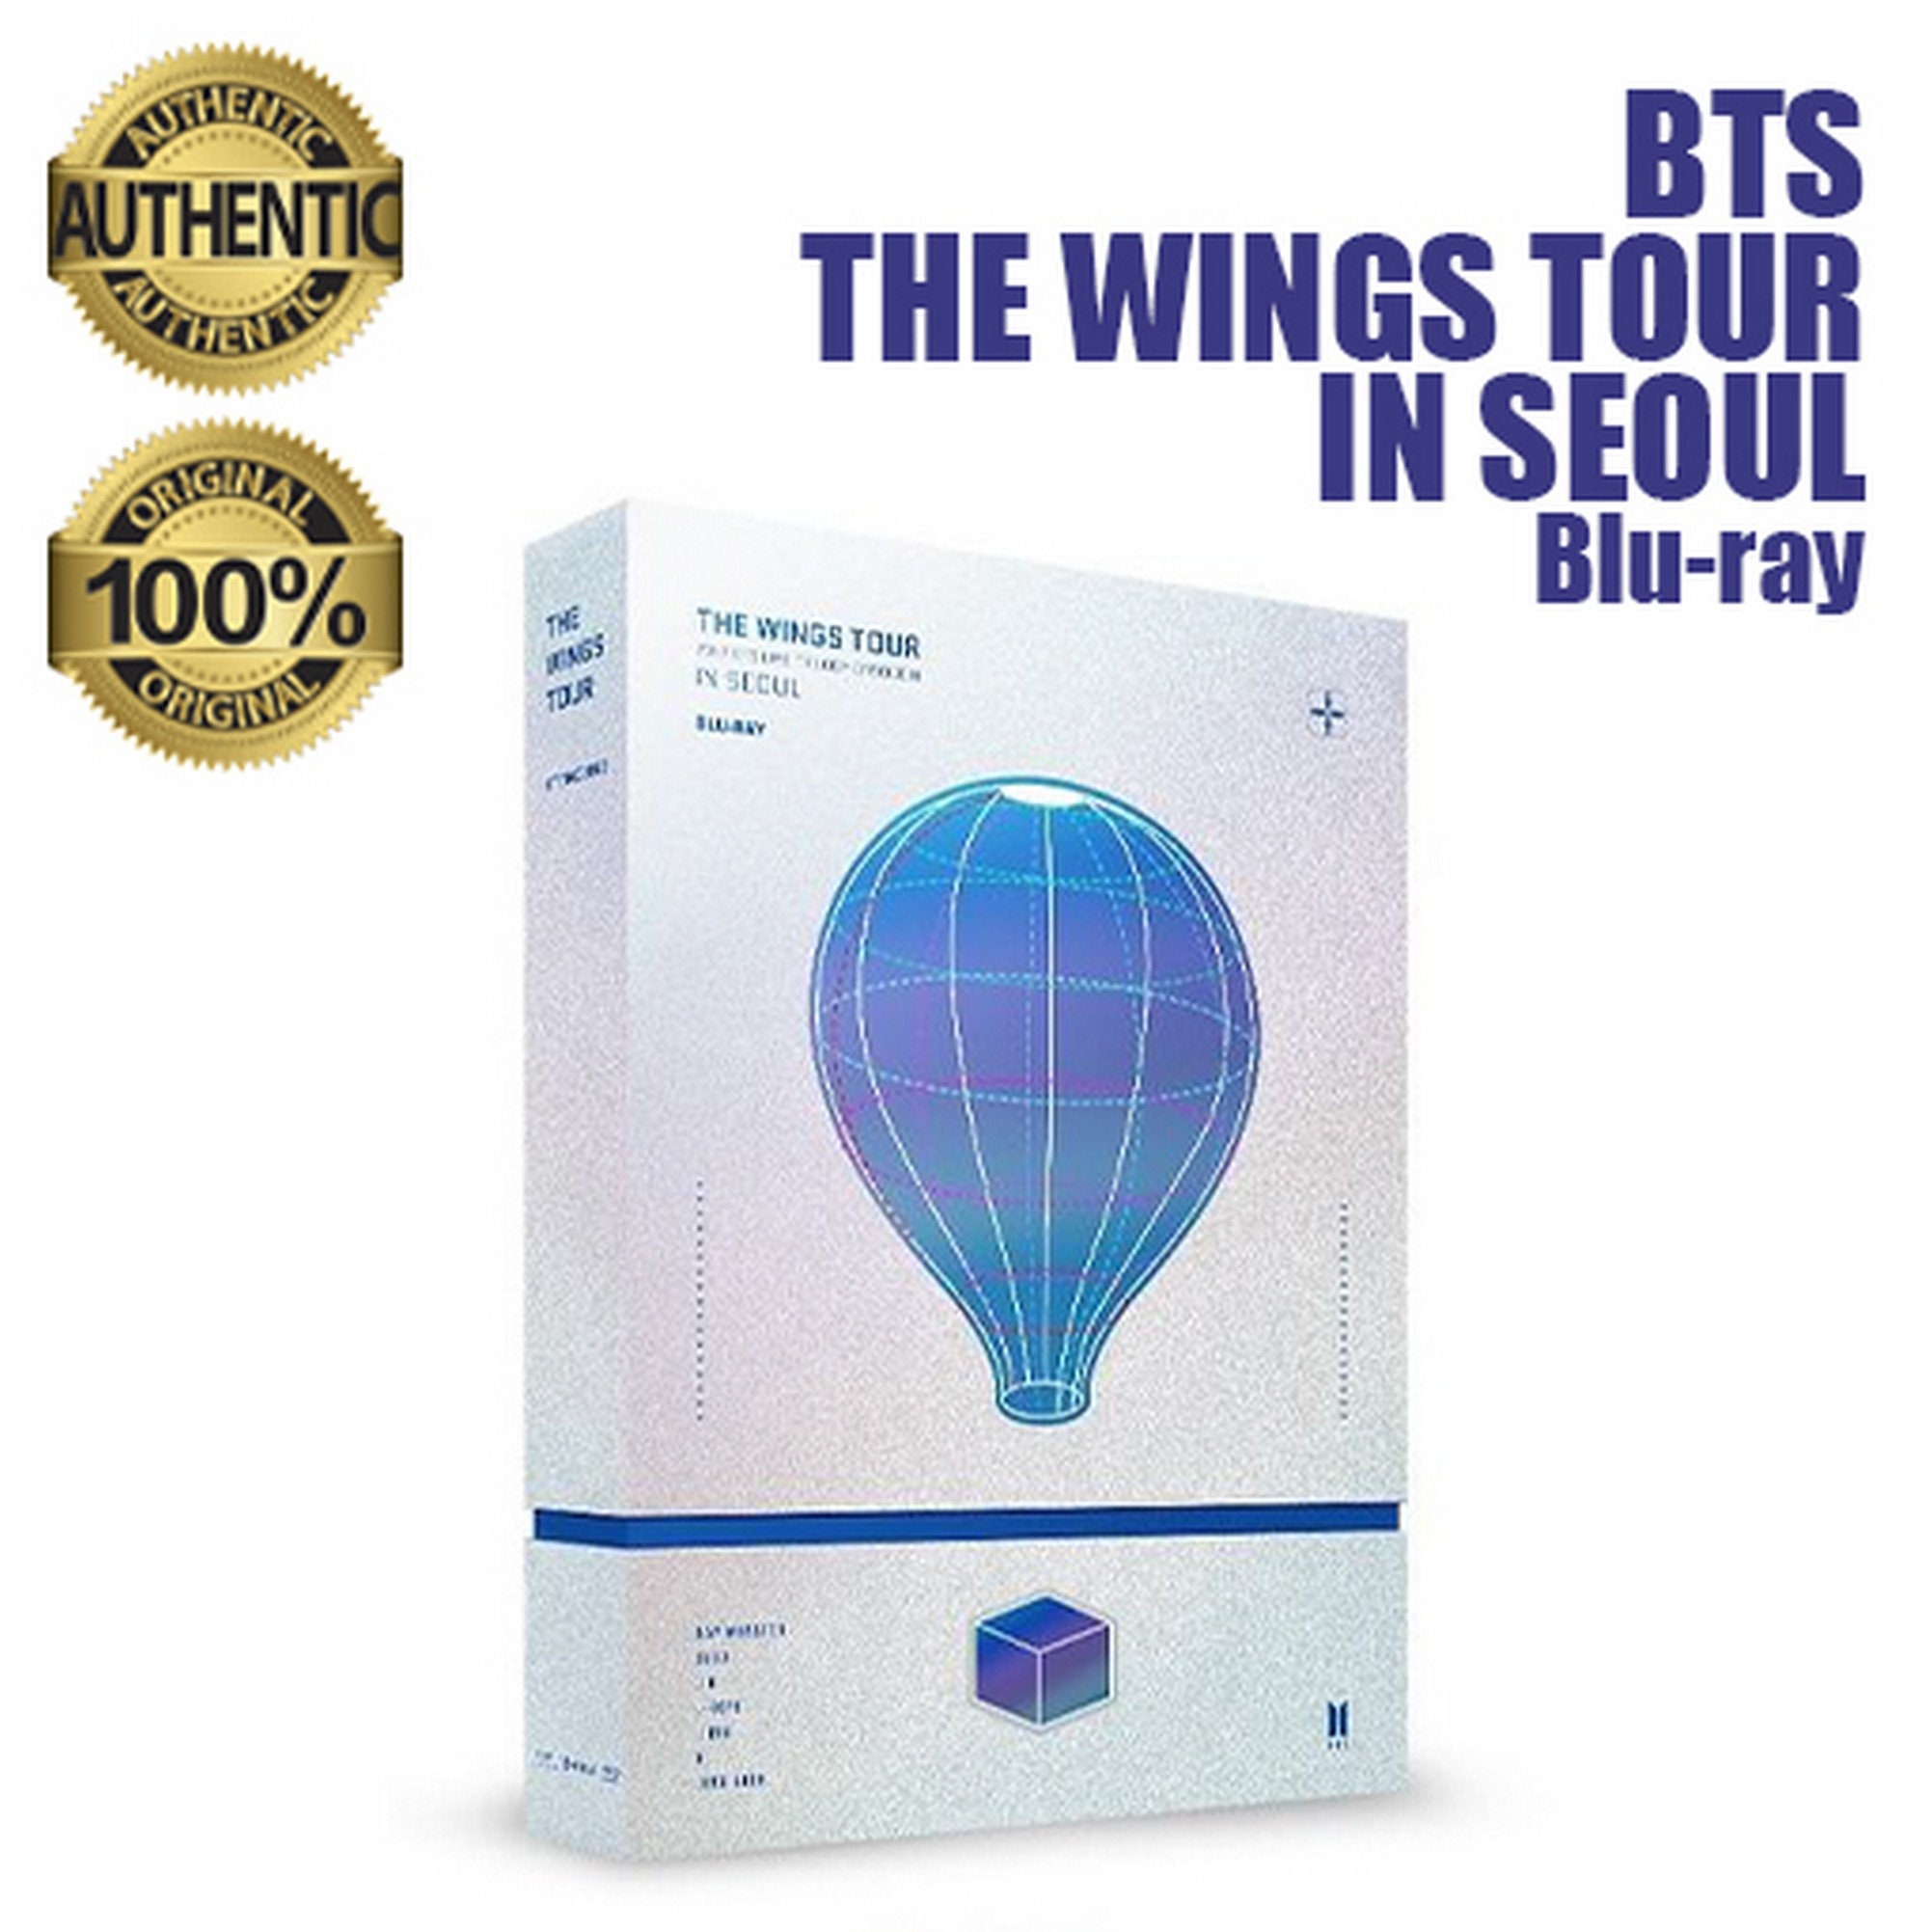 BTS THE WINGS TOUR IN SEOUL\nBlu-ray